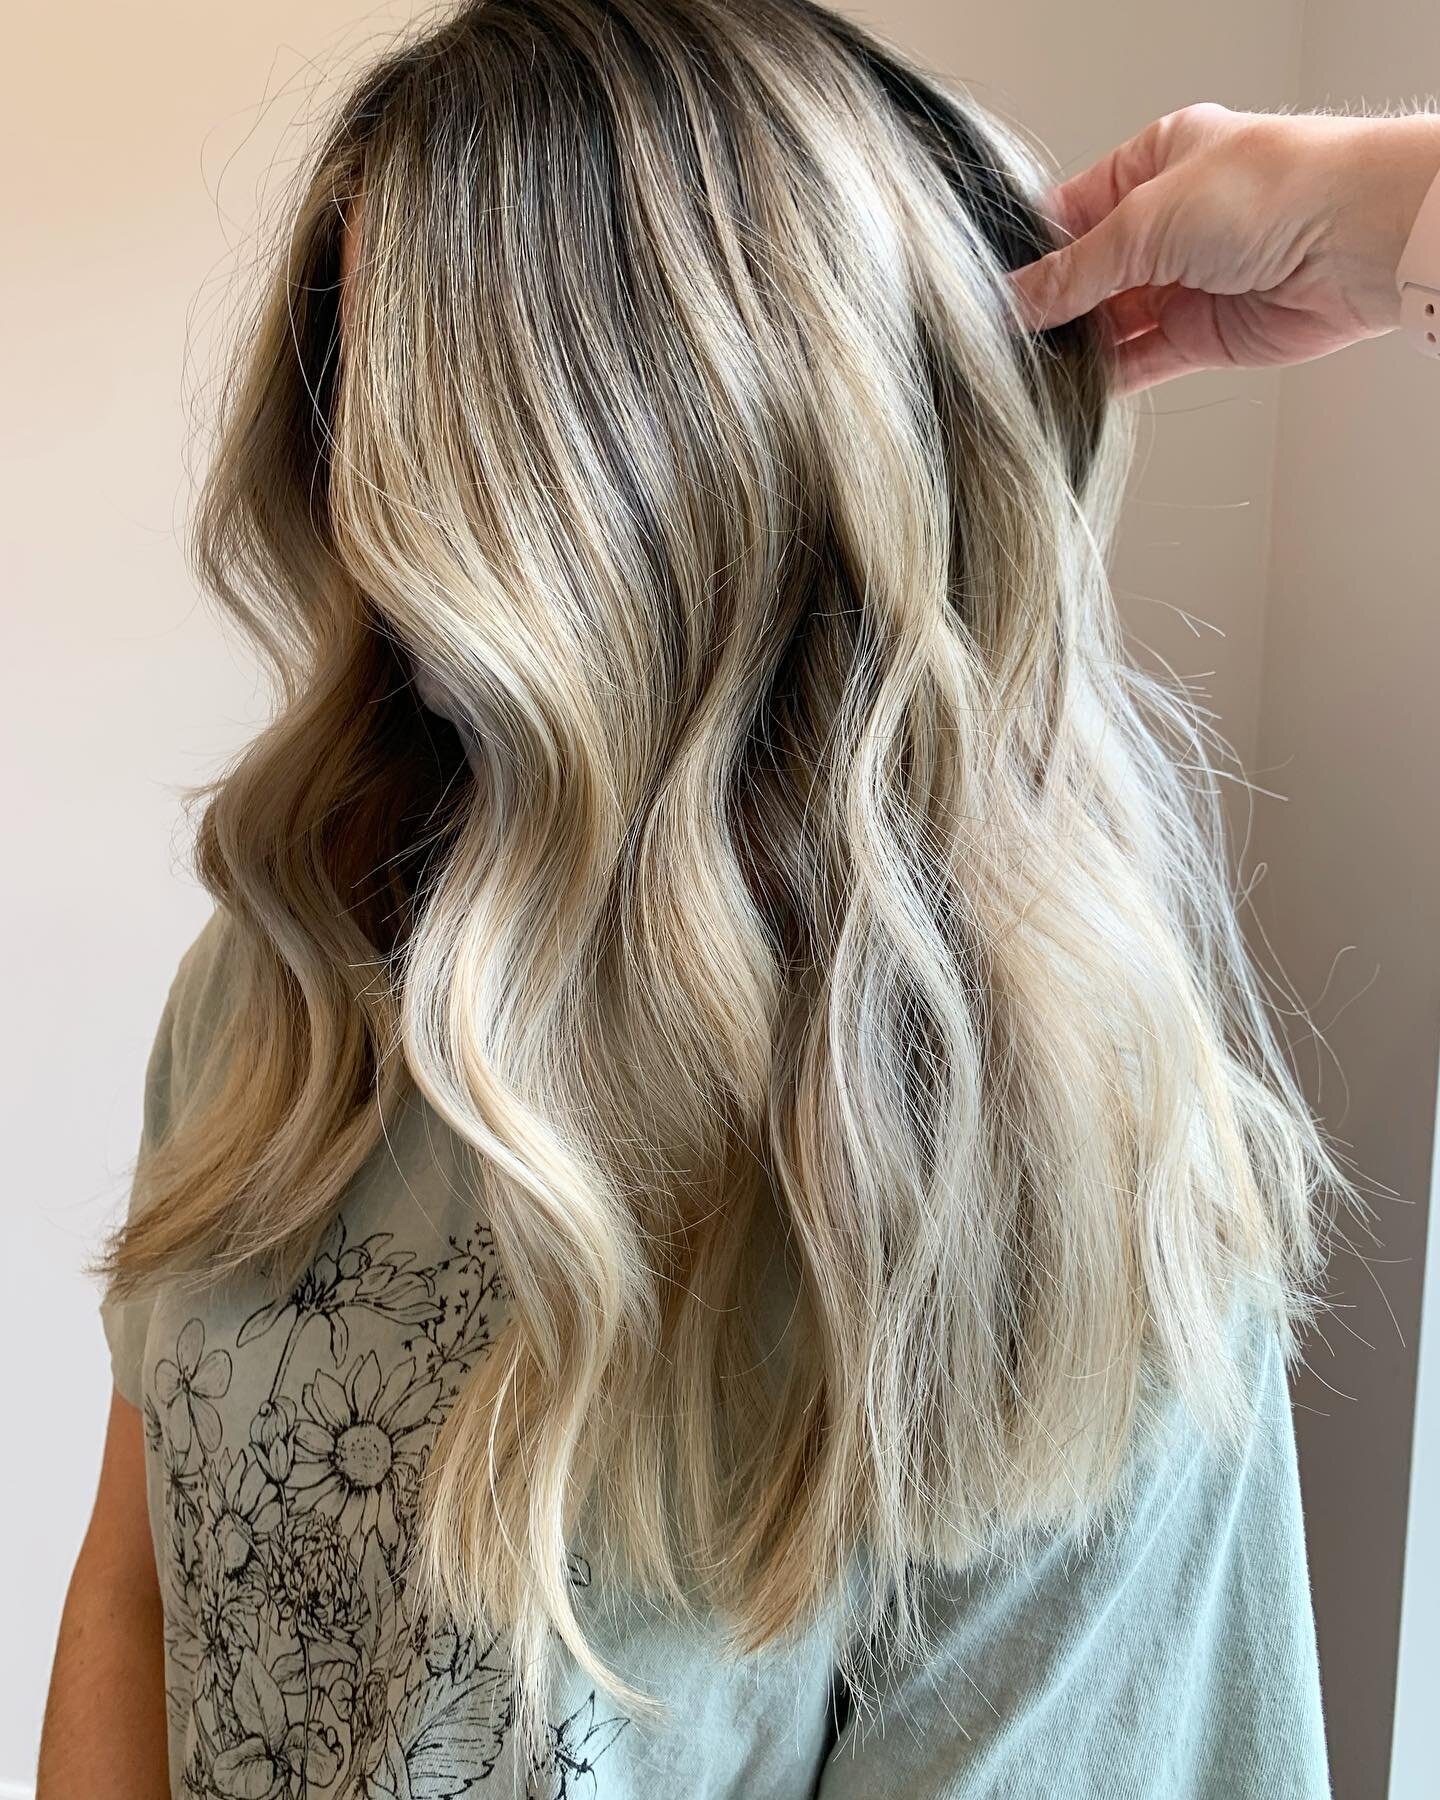 ✨ Buttery Blonde ✨
.
Follow the link in my bio to book an appointment with me!
.
#wakeforesthairstylist #wakeforesthair #wakeforestnc #raleighhairstylist #raleighhair #raleigh #balayage #919hairstylist #919balayage #blondebalayage #blonding #blonding